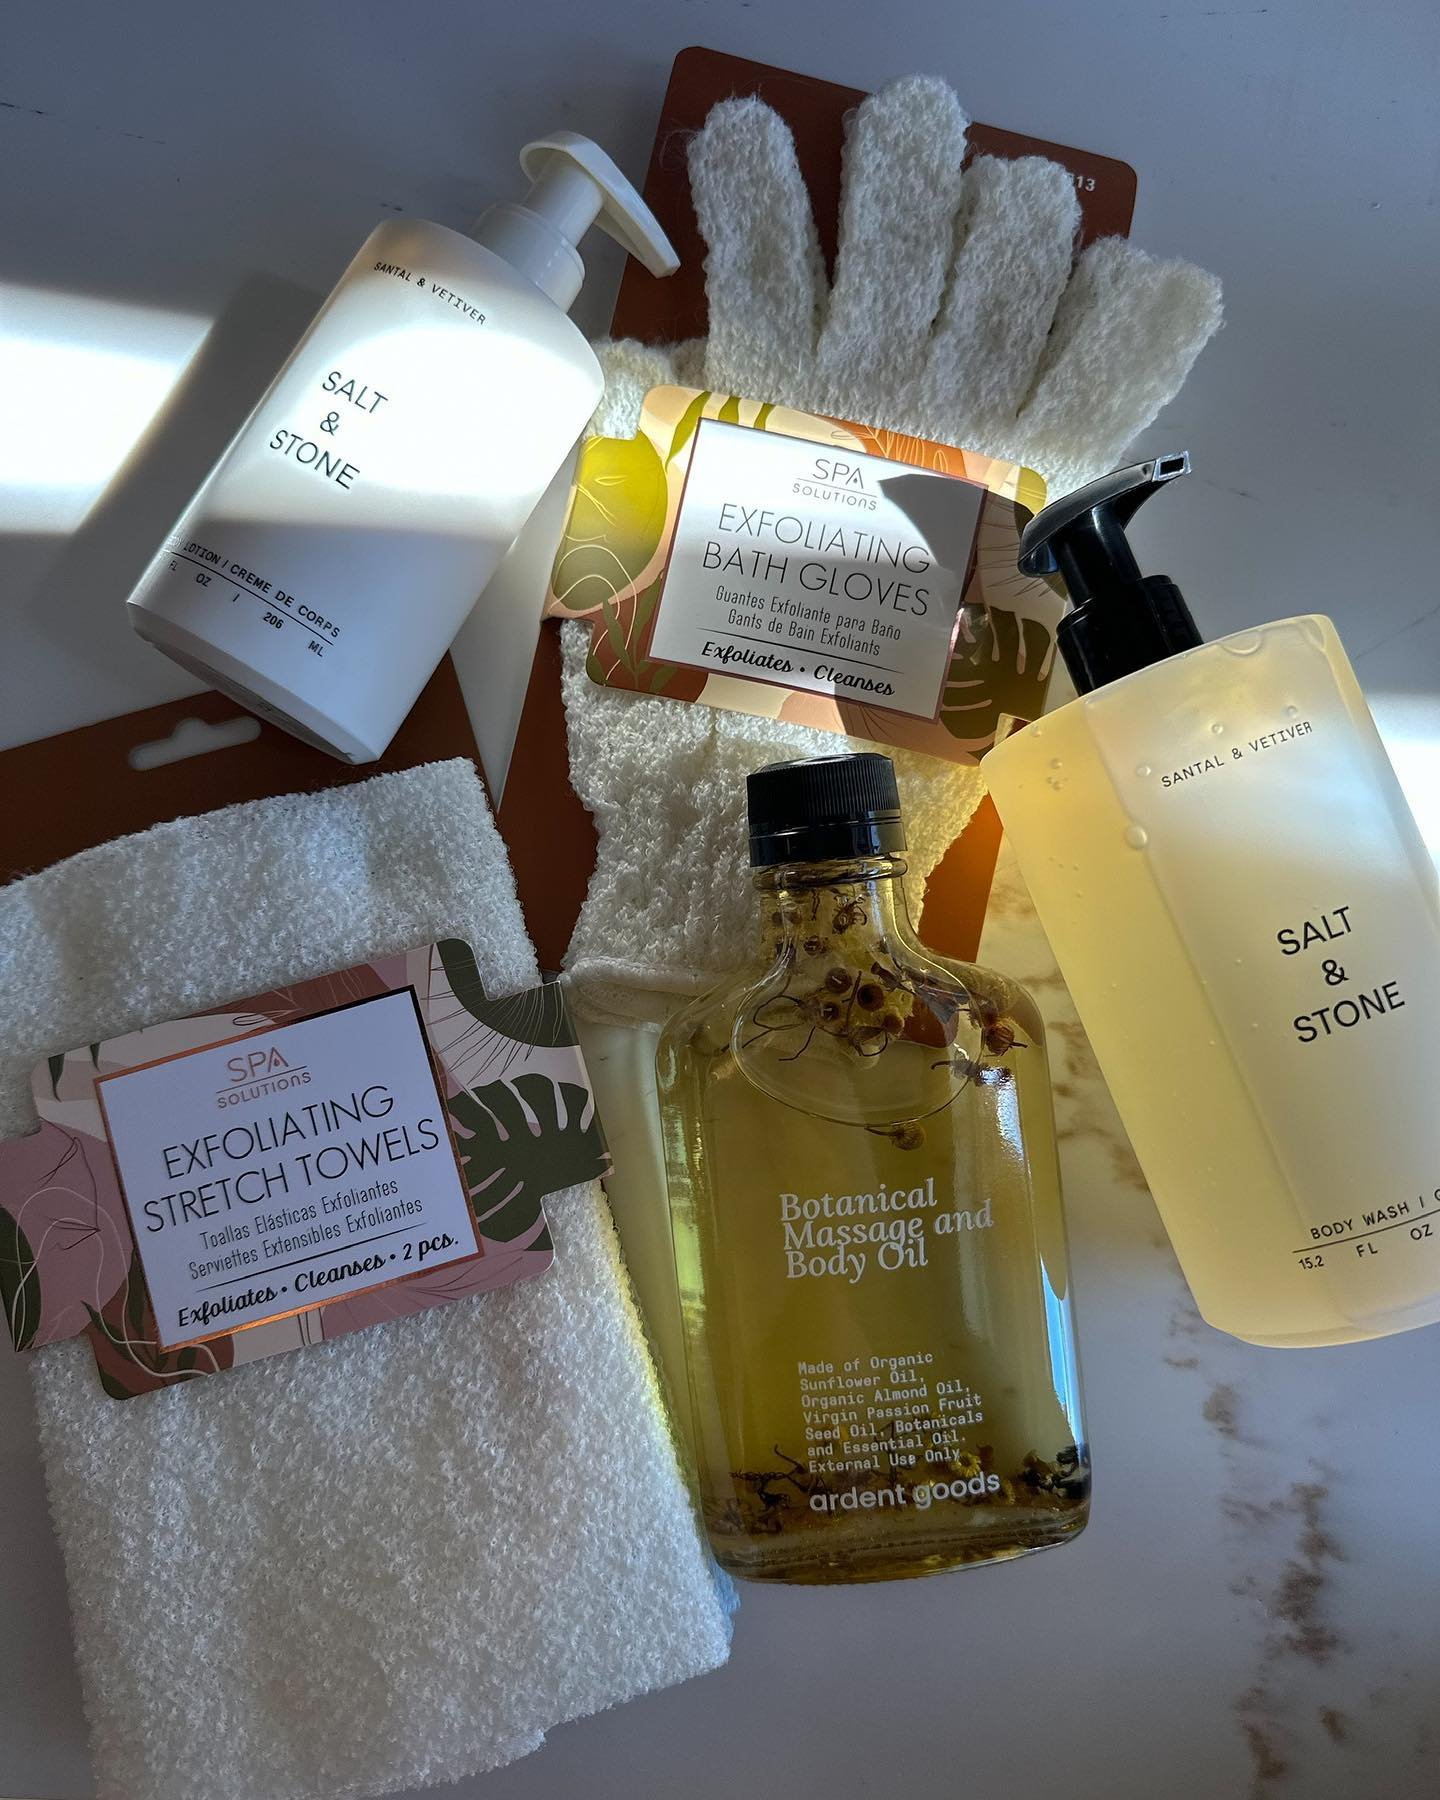 Indulge in self-care at home 🤍

As summer is approaching, it&rsquo;s time to make sure you&rsquo;re prepared! Keeping your skin exfoliated and moisturized is the best way to achieve glowing skin in the warmer months ✨

Shop all of these products at 